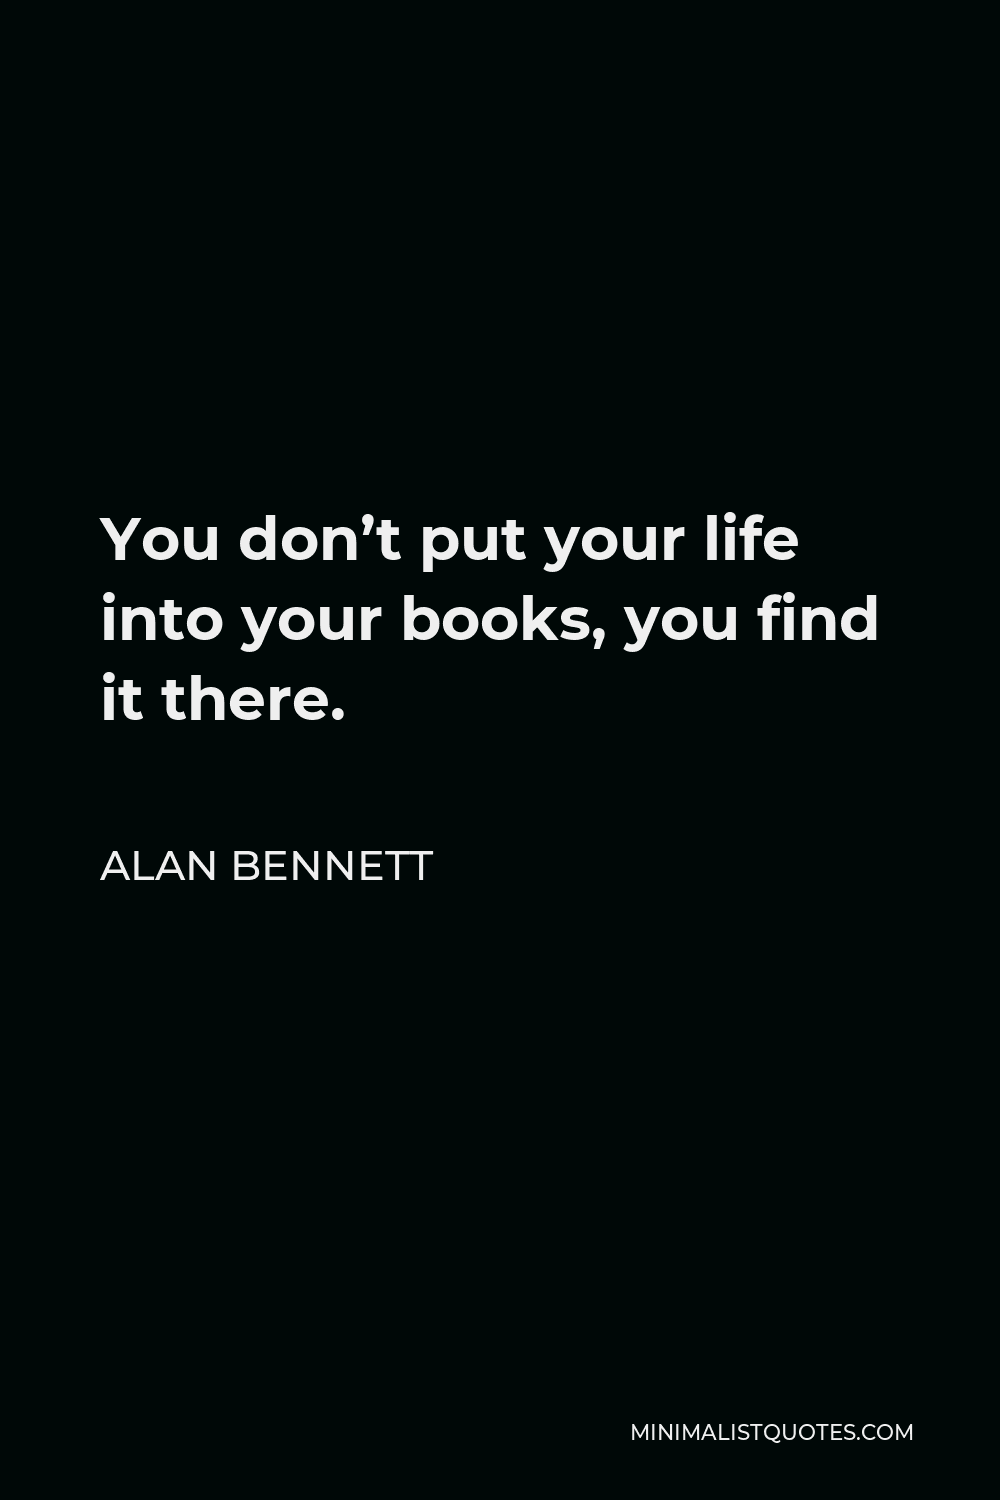 Alan Bennett Quote - You don’t put your life into your books, you find it there.